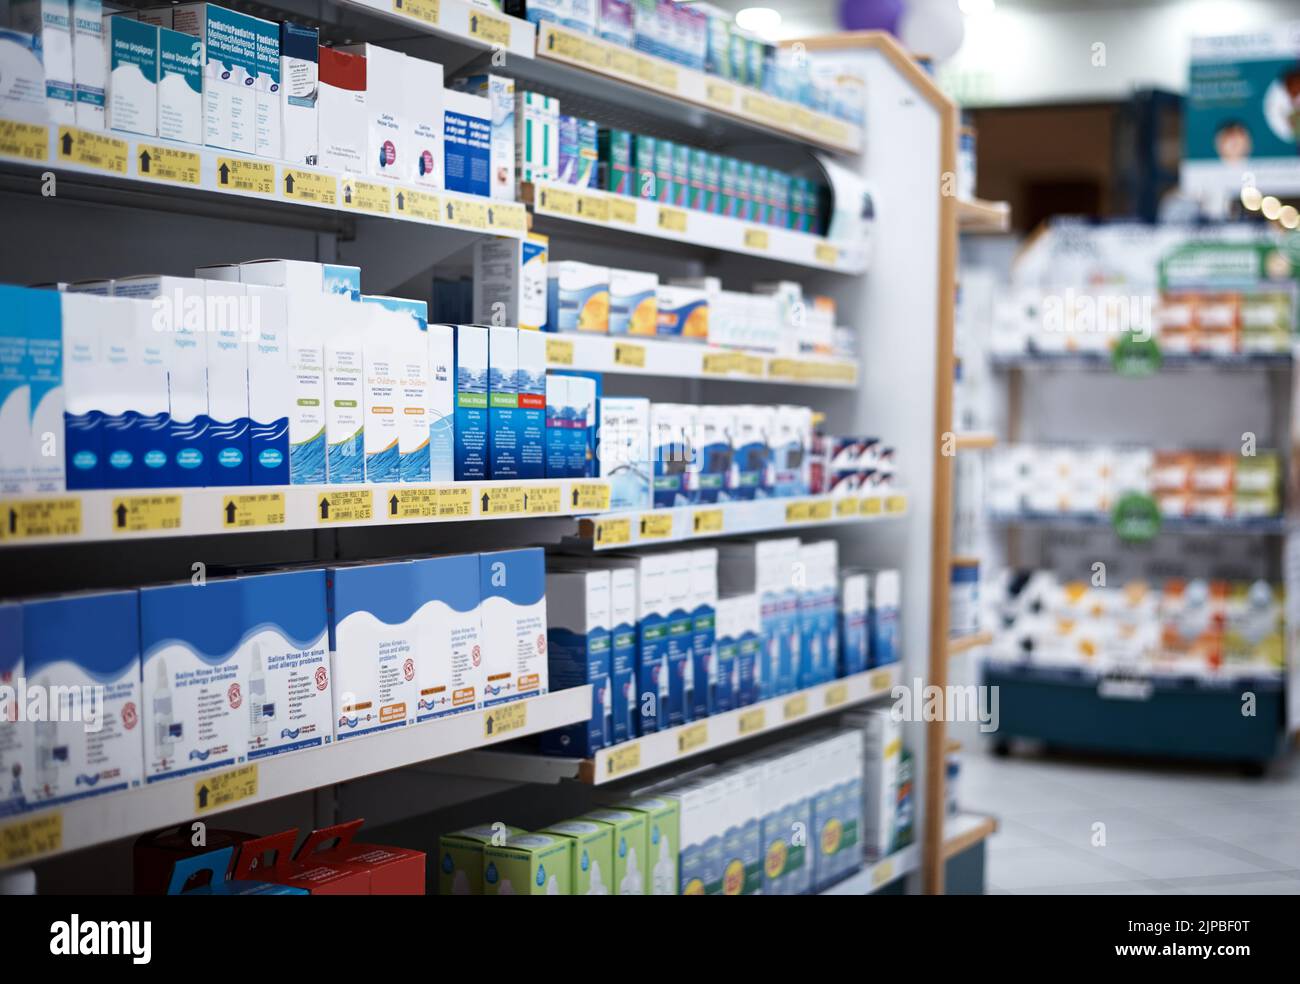 Every aisle is stocked with the health essentials you need. shelves stocked with various medicinal products in a pharmacy. Stock Photo